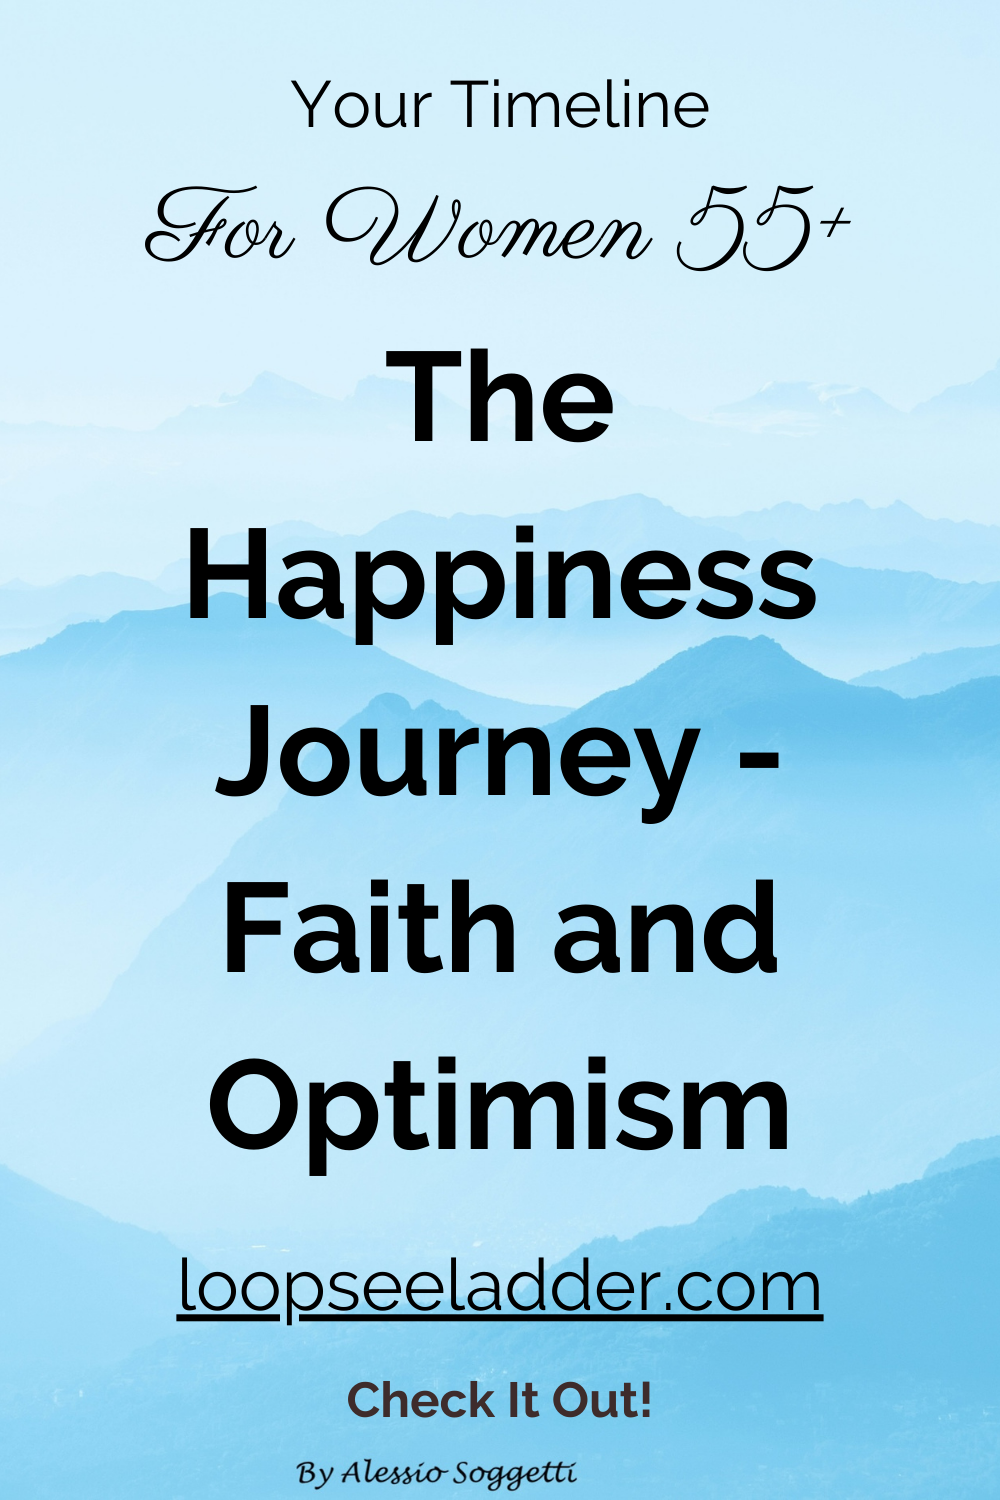 Unlocking the Happiness Equation: Faith, Optimism, and the Journey of Women 55+